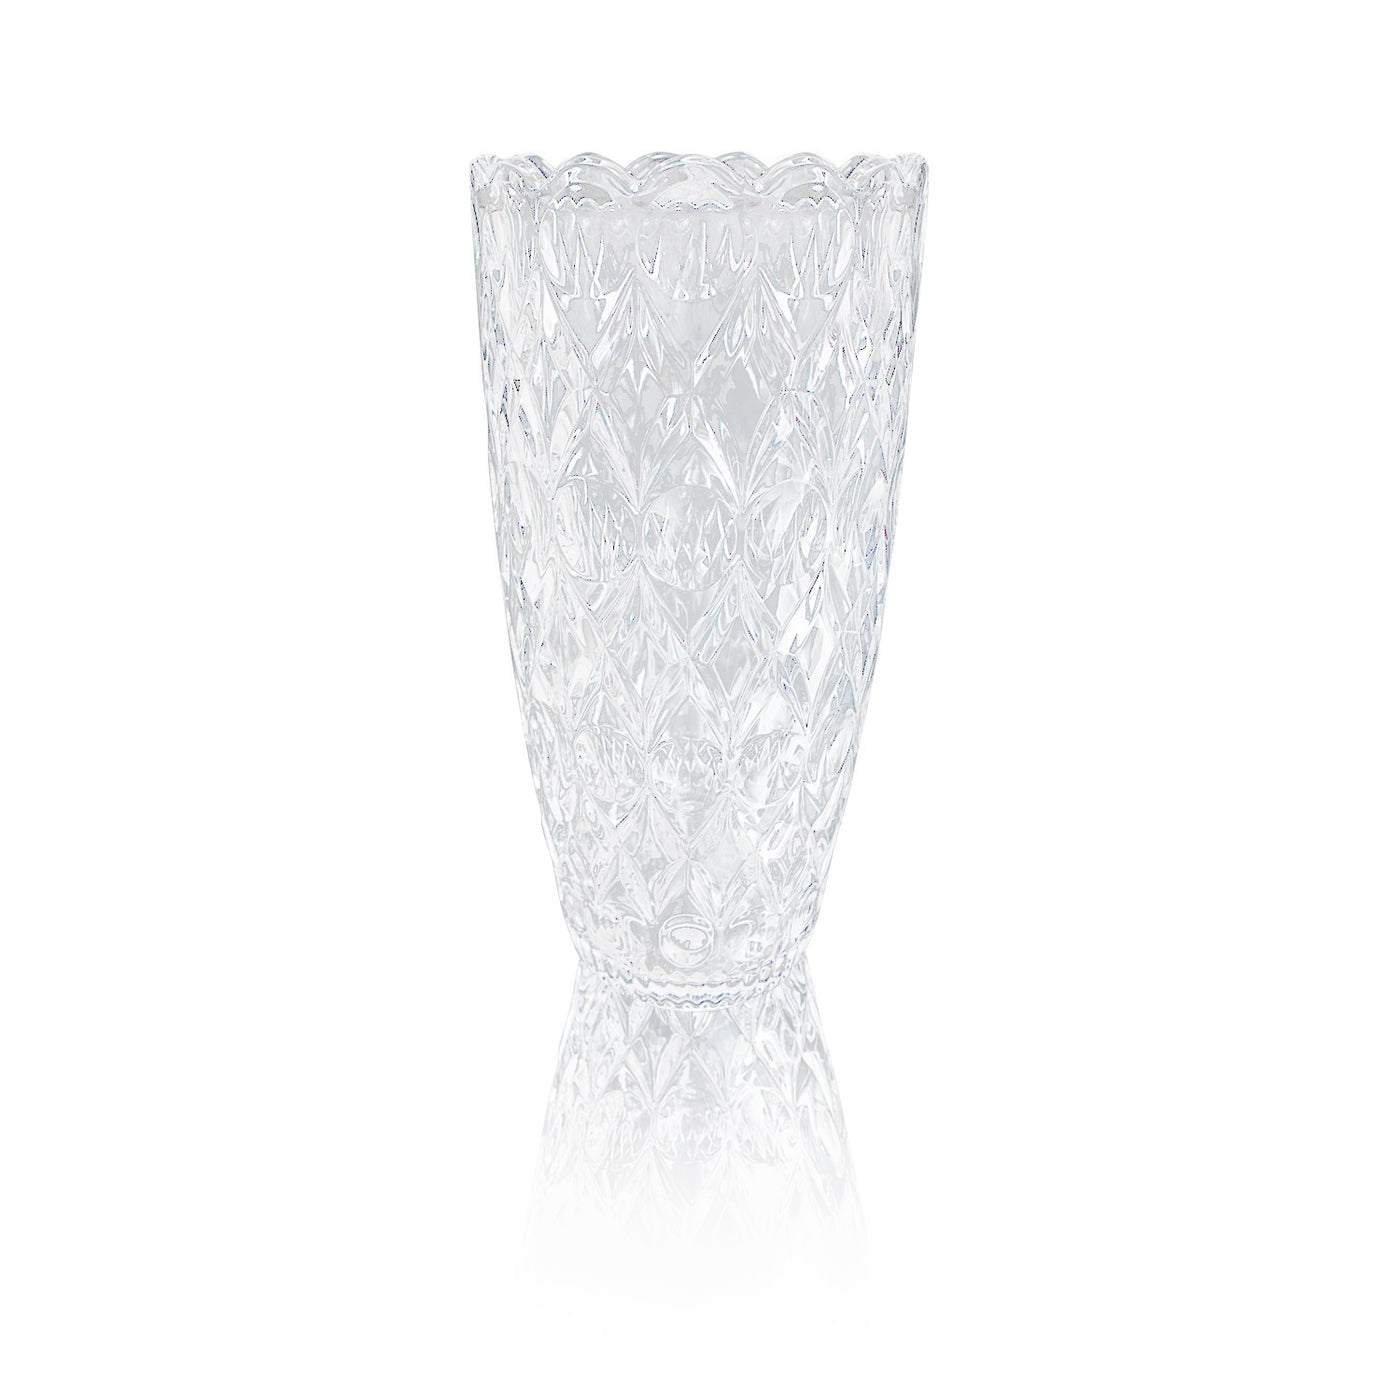 Crystal Vases for Flowers 12" Tall Glass Centerpieces Living Room Wedding Decor